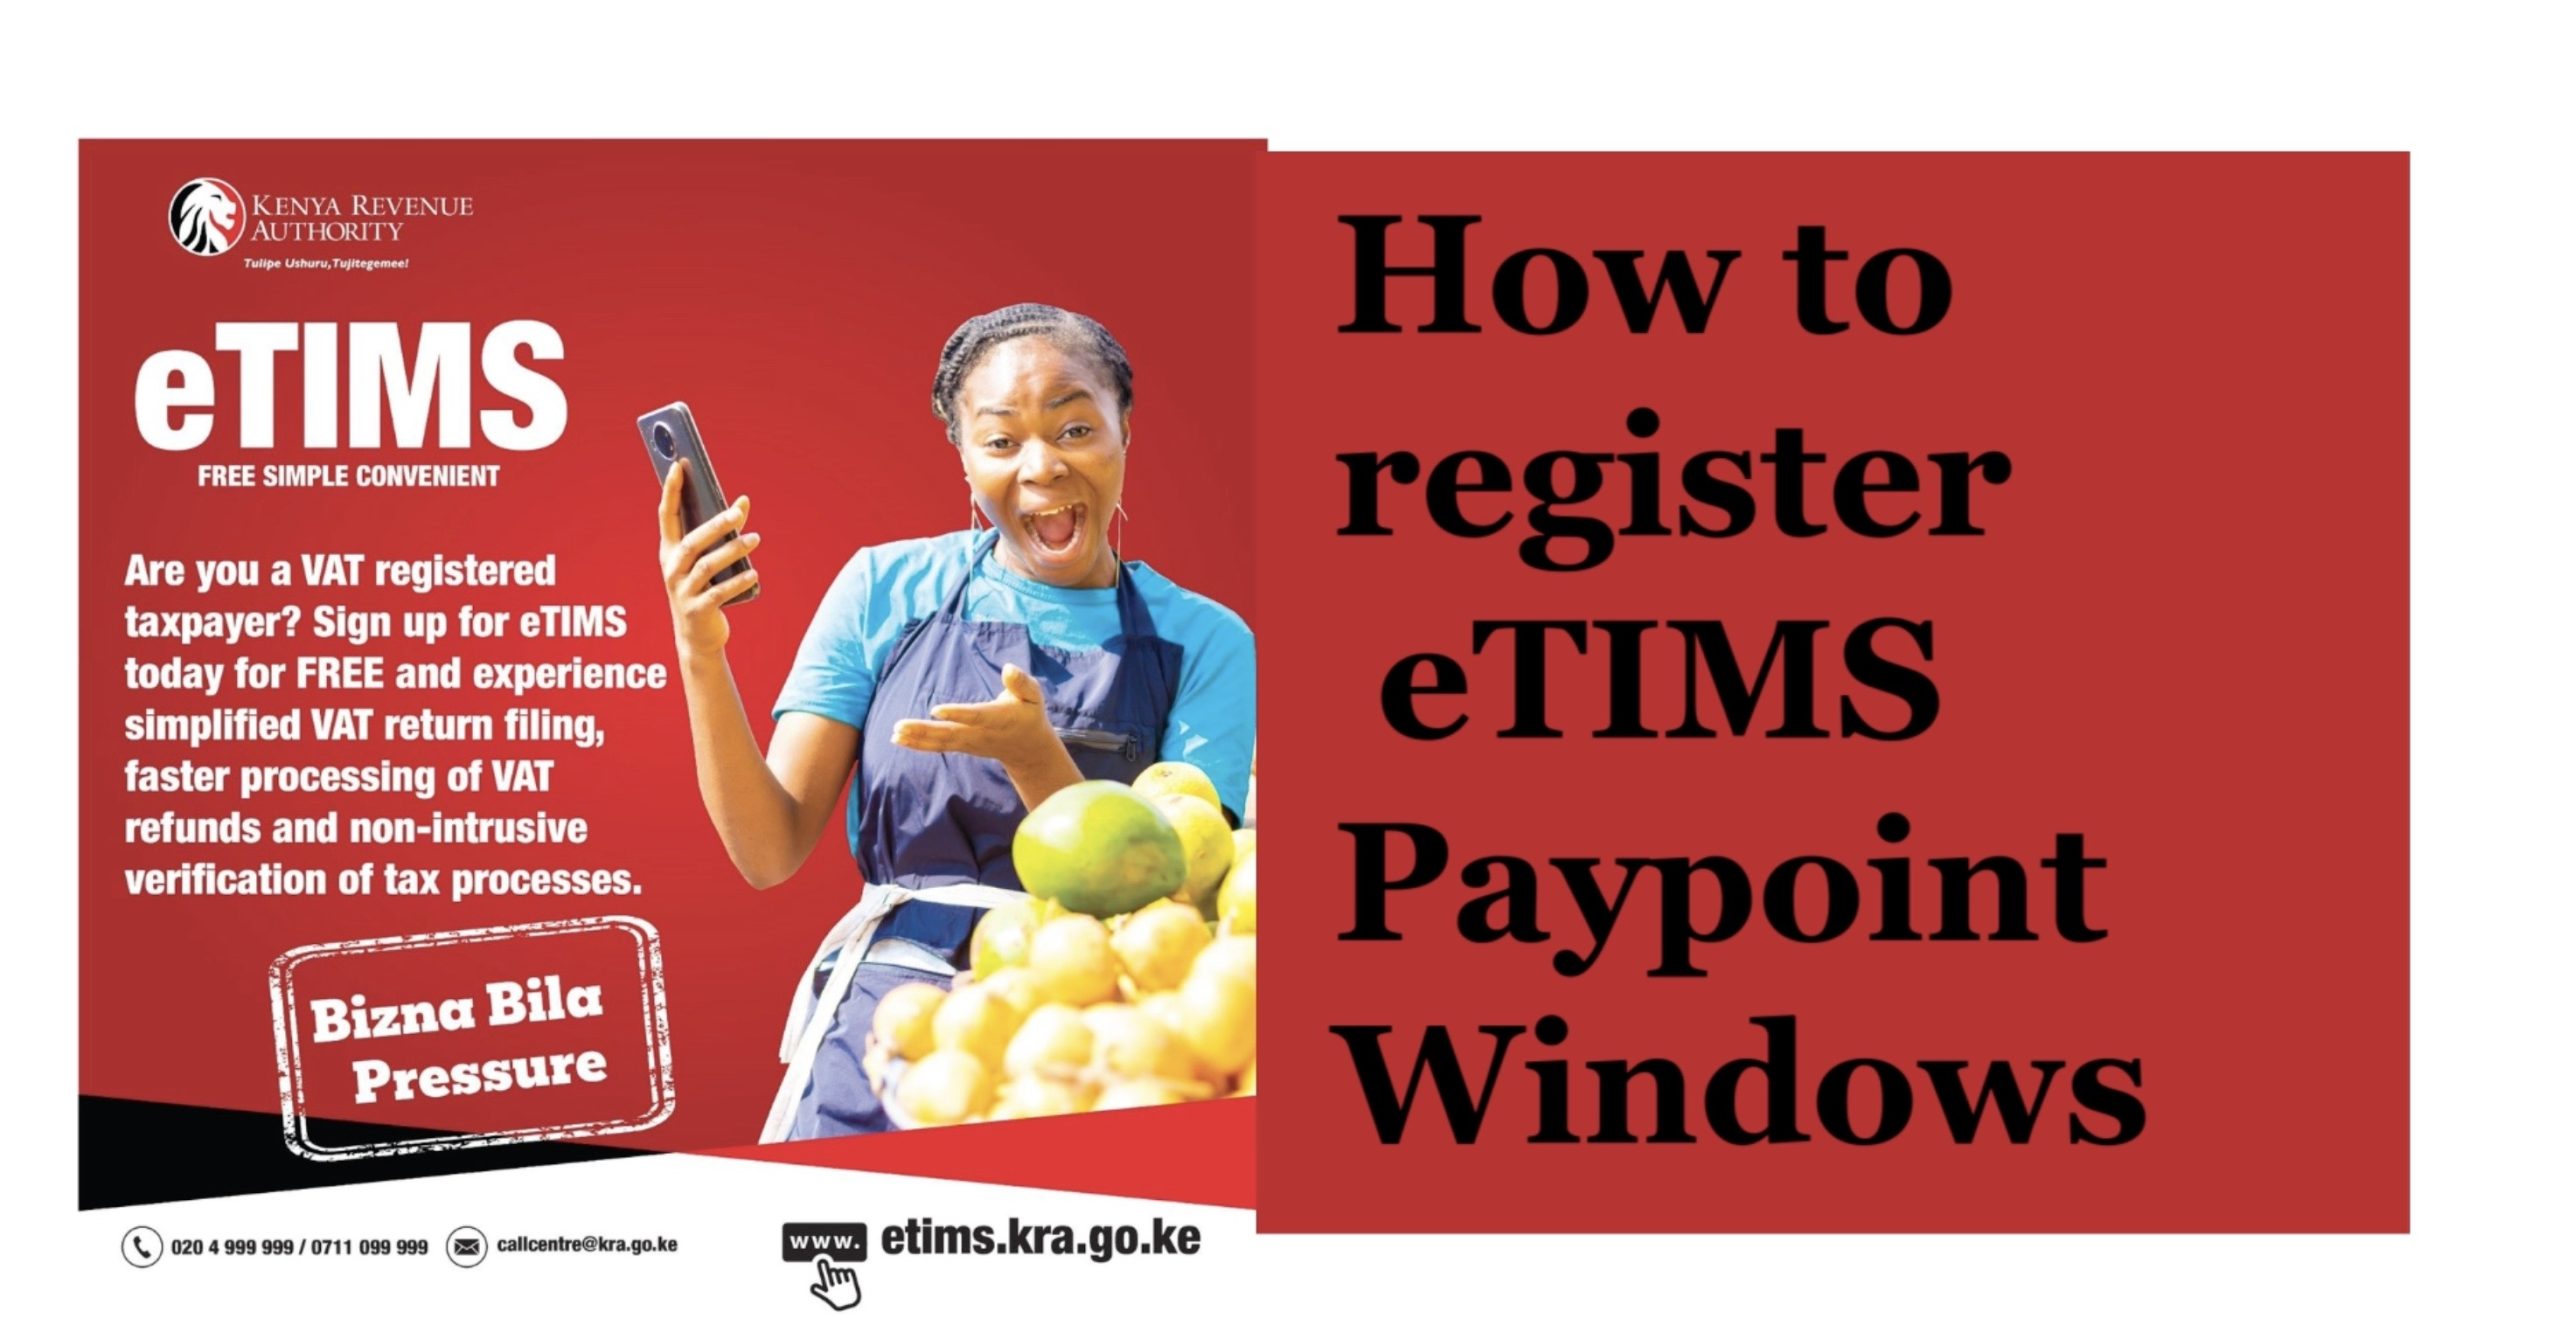 eTIMS: HOW TO REGISTER | Goods/ both goods and service traders only